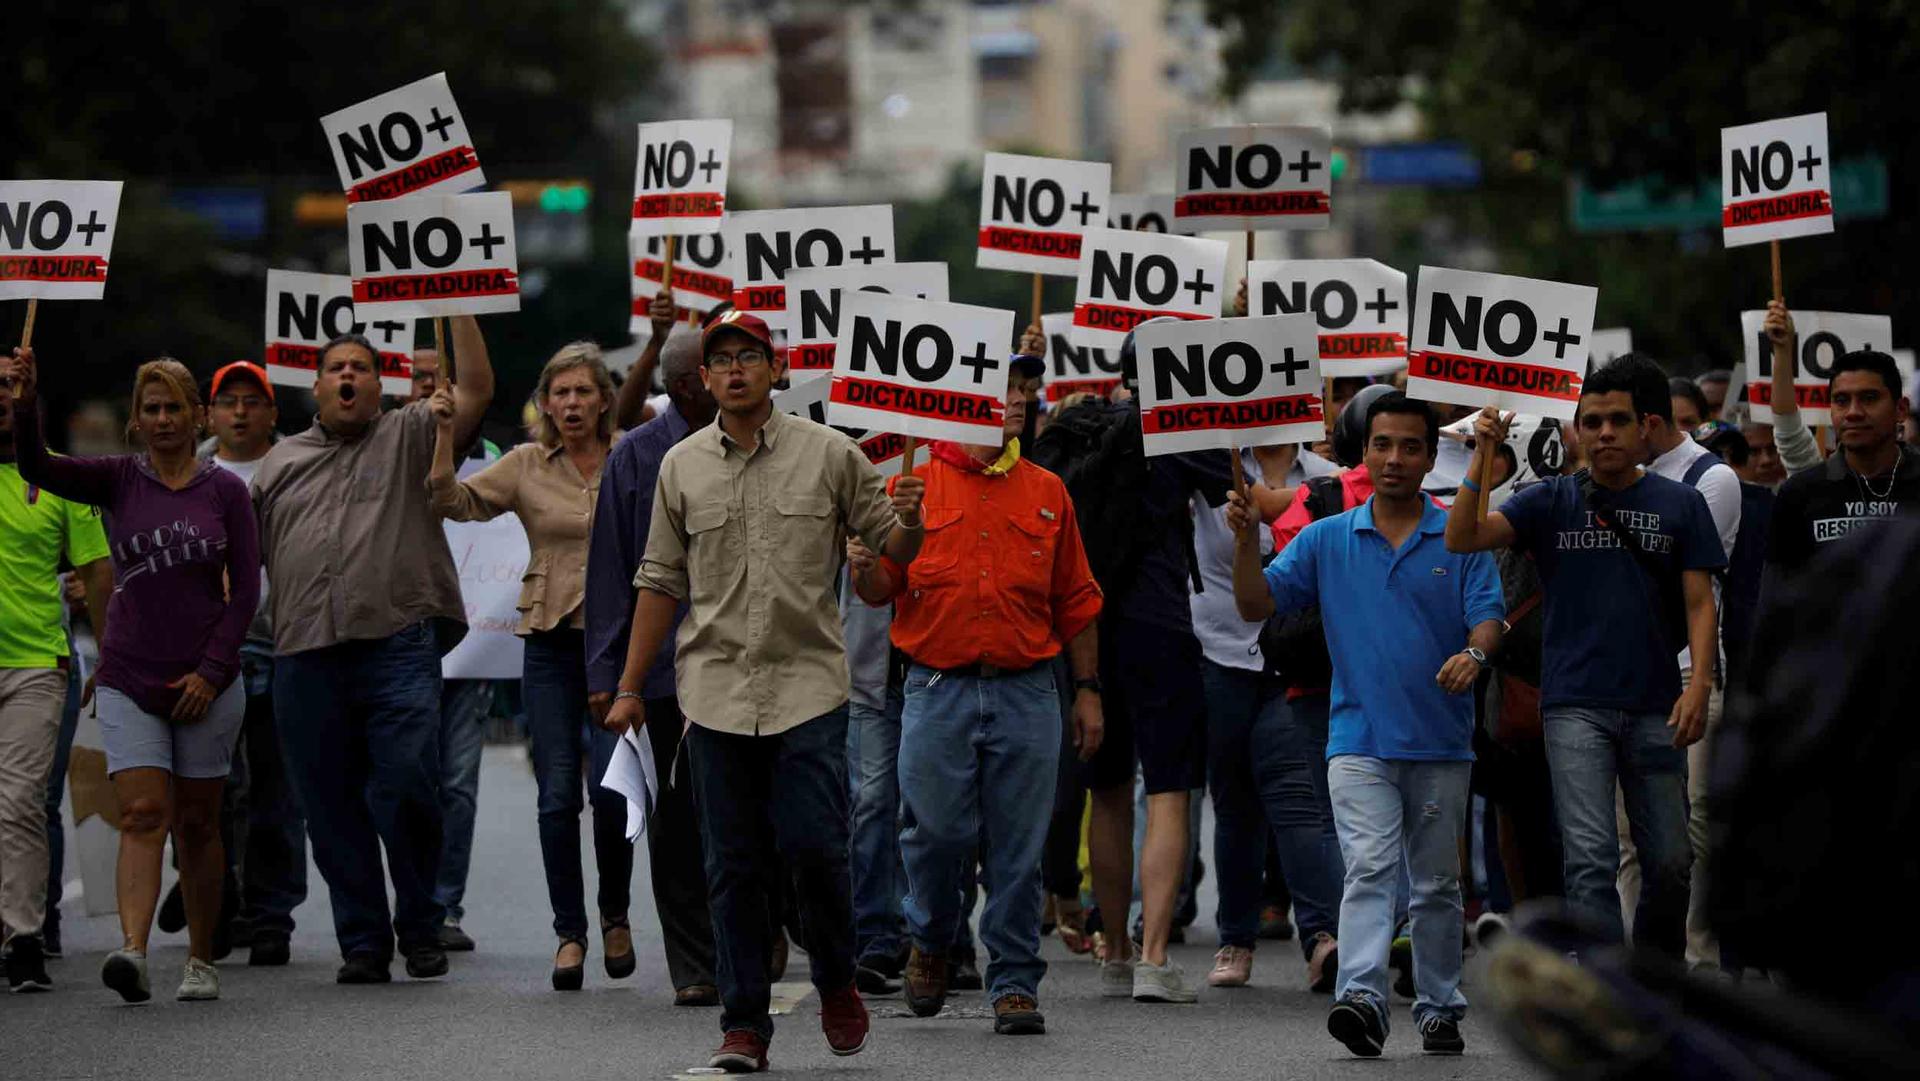 A group of people hold signs that say "No dictadura" as they march down a street.